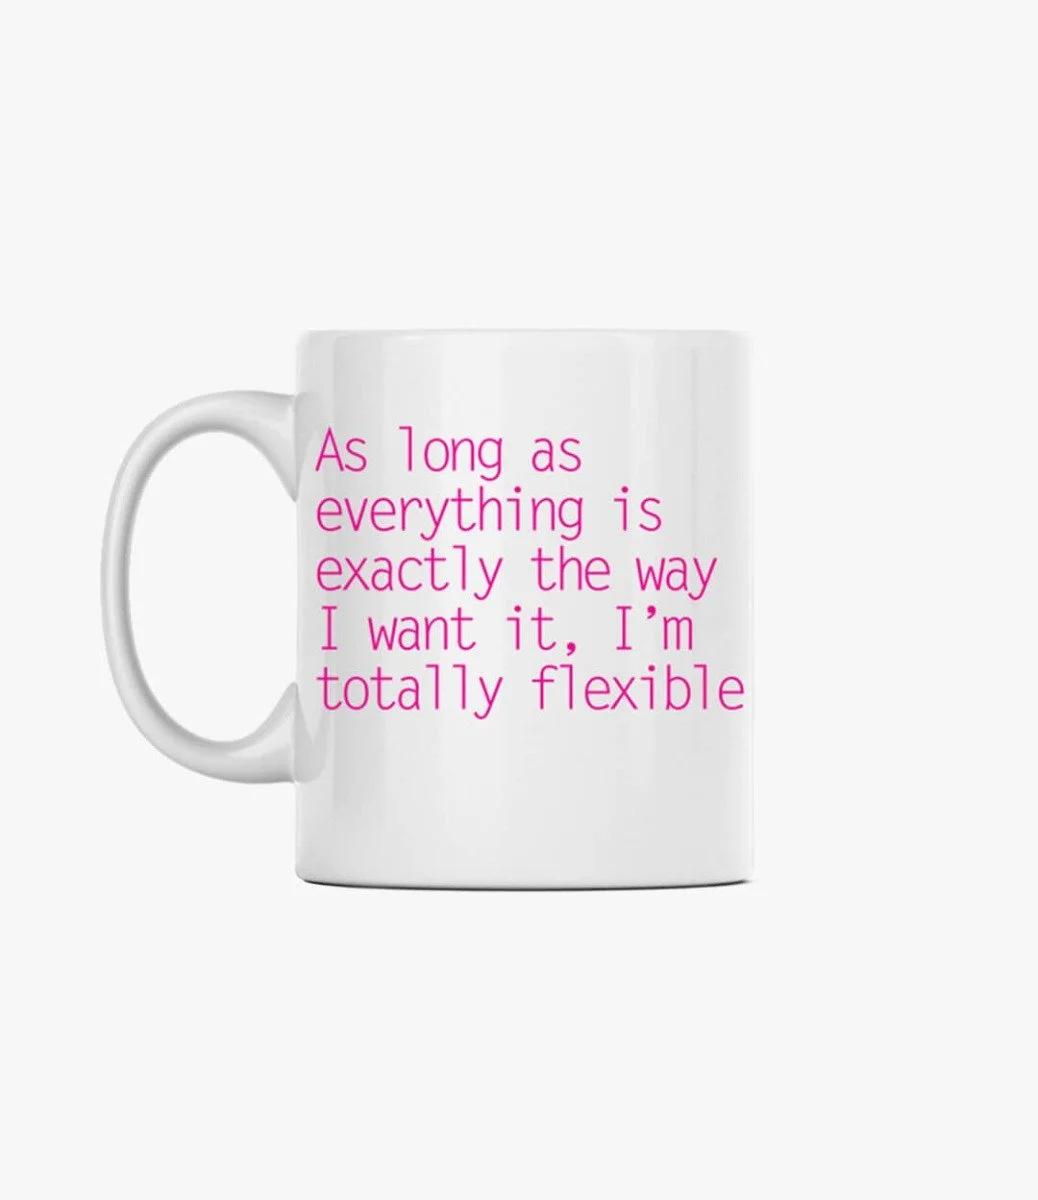 As long as everything is exactly the way I want it. I'm totally flexible Mug